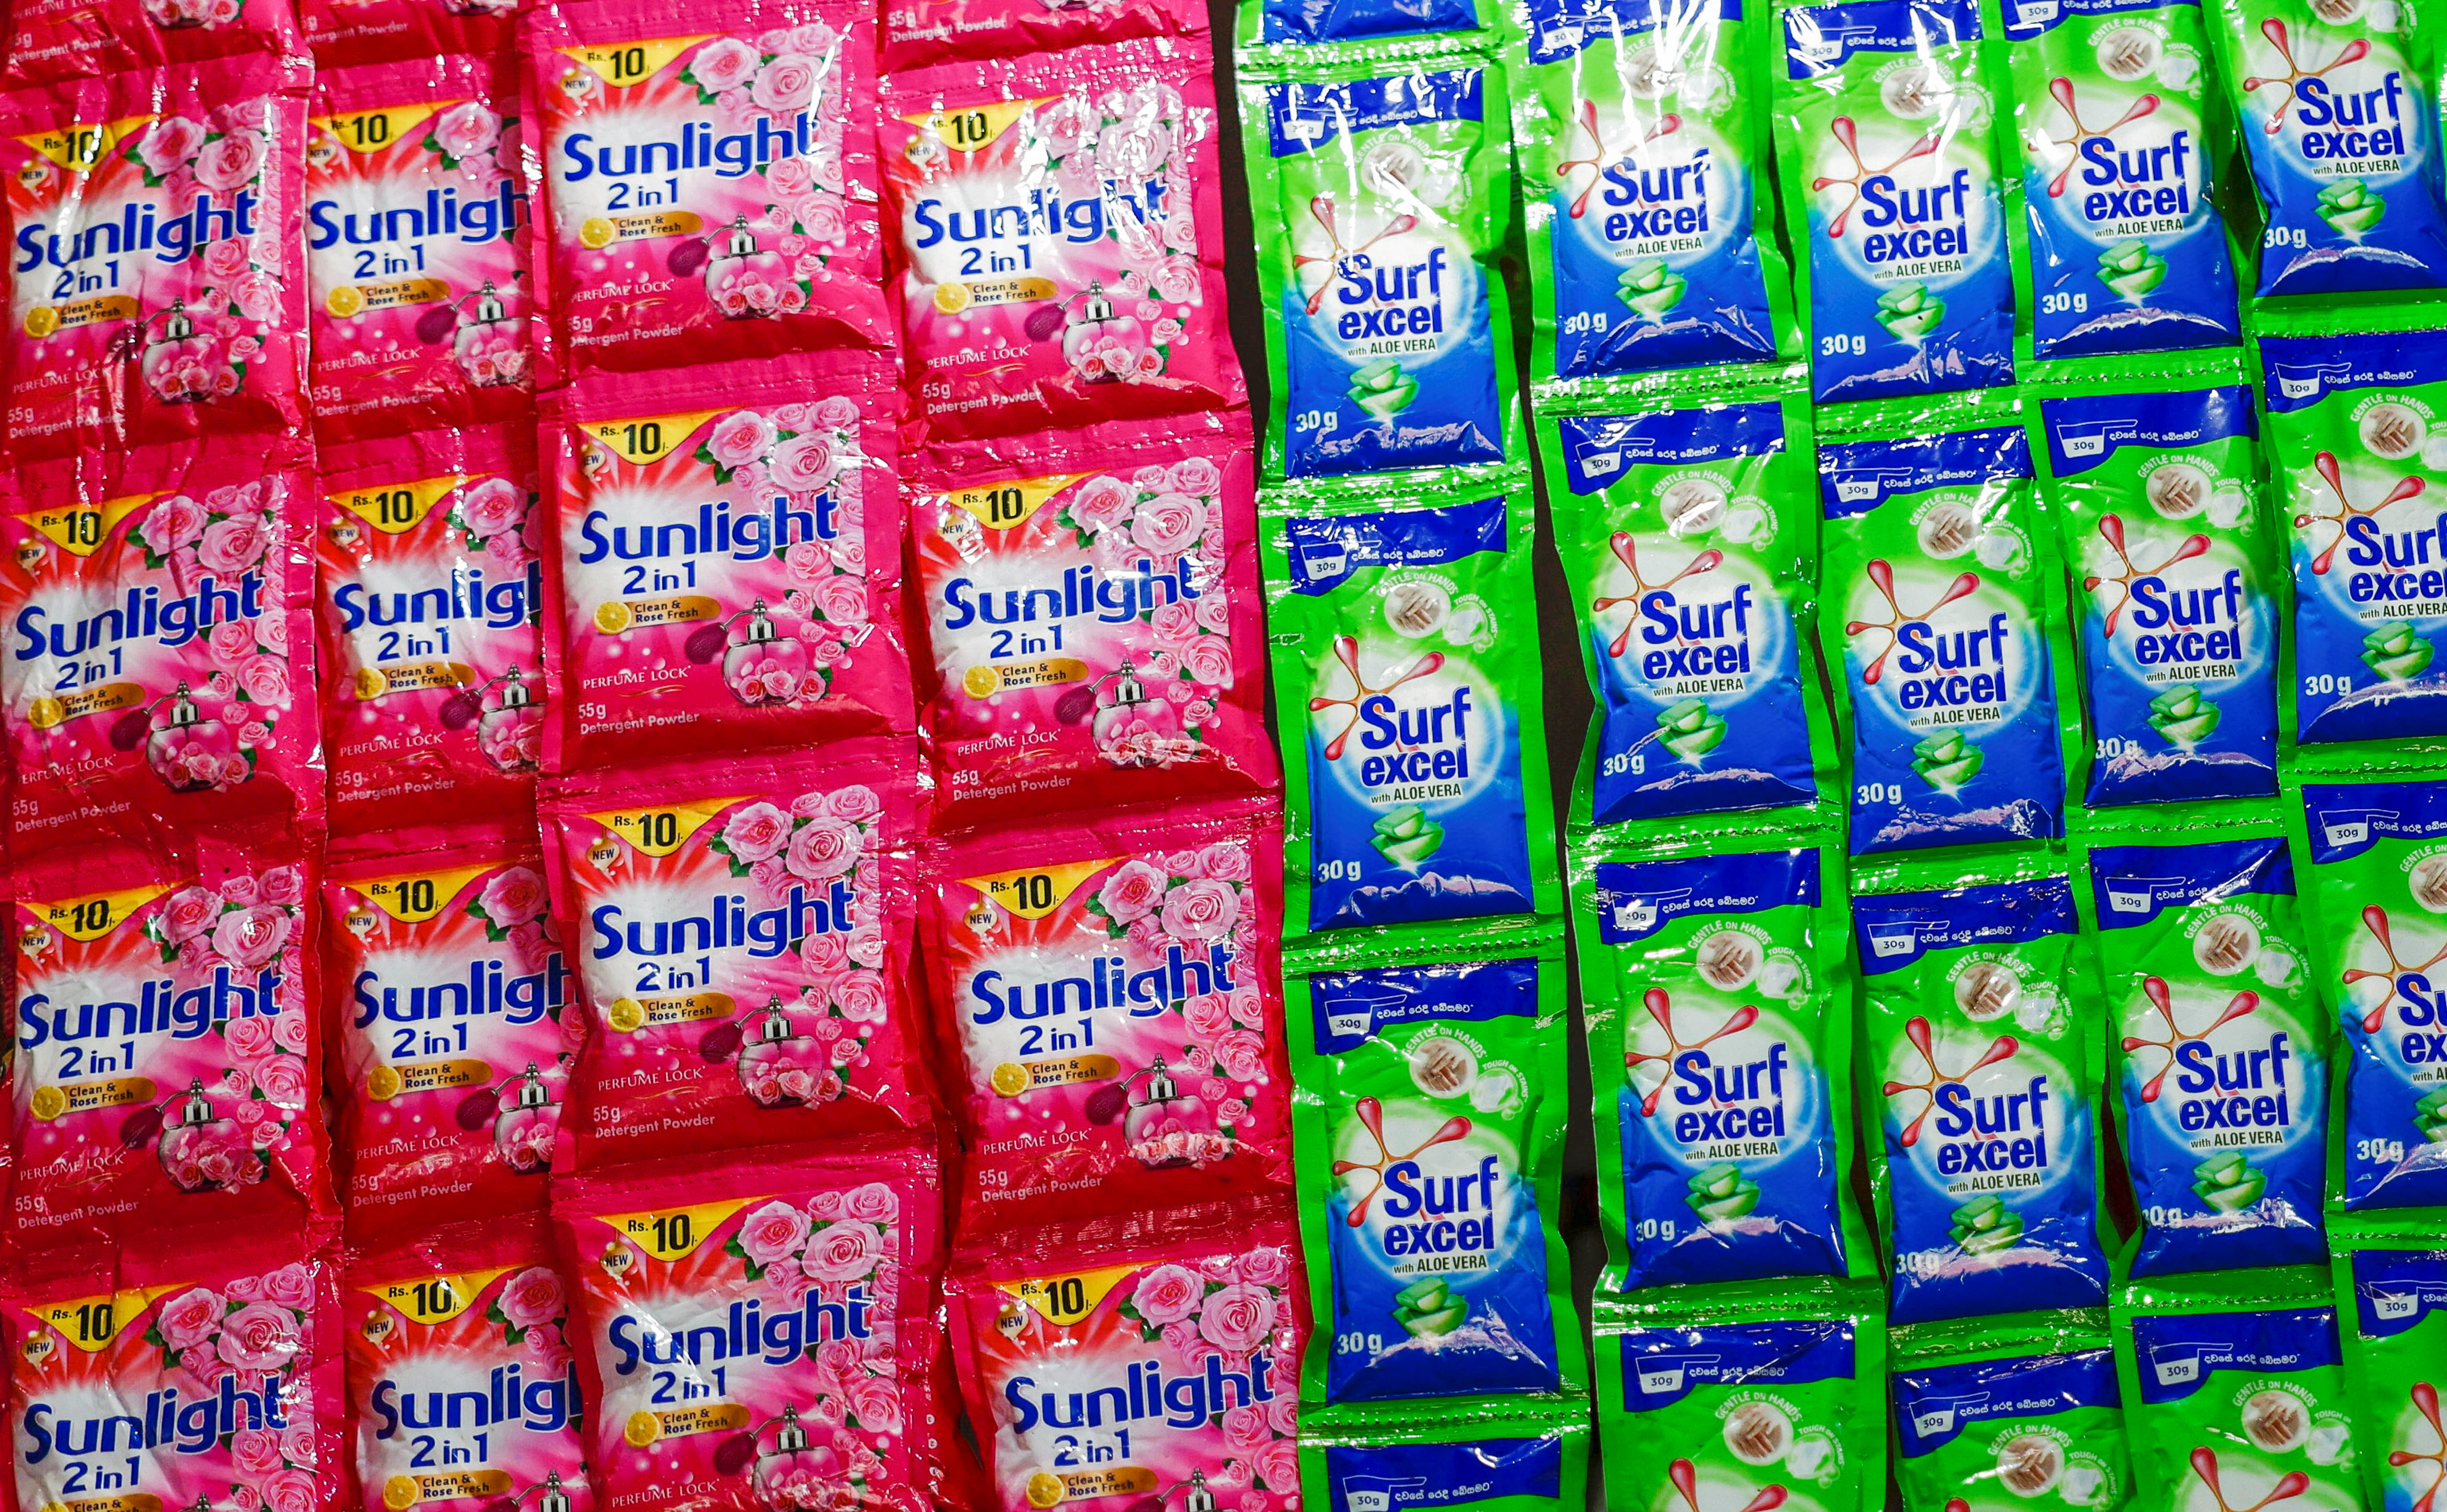 A view of plastic sachets of Unilever's Sunlight and Surf Excel laundry detergent at a shop in Colombo